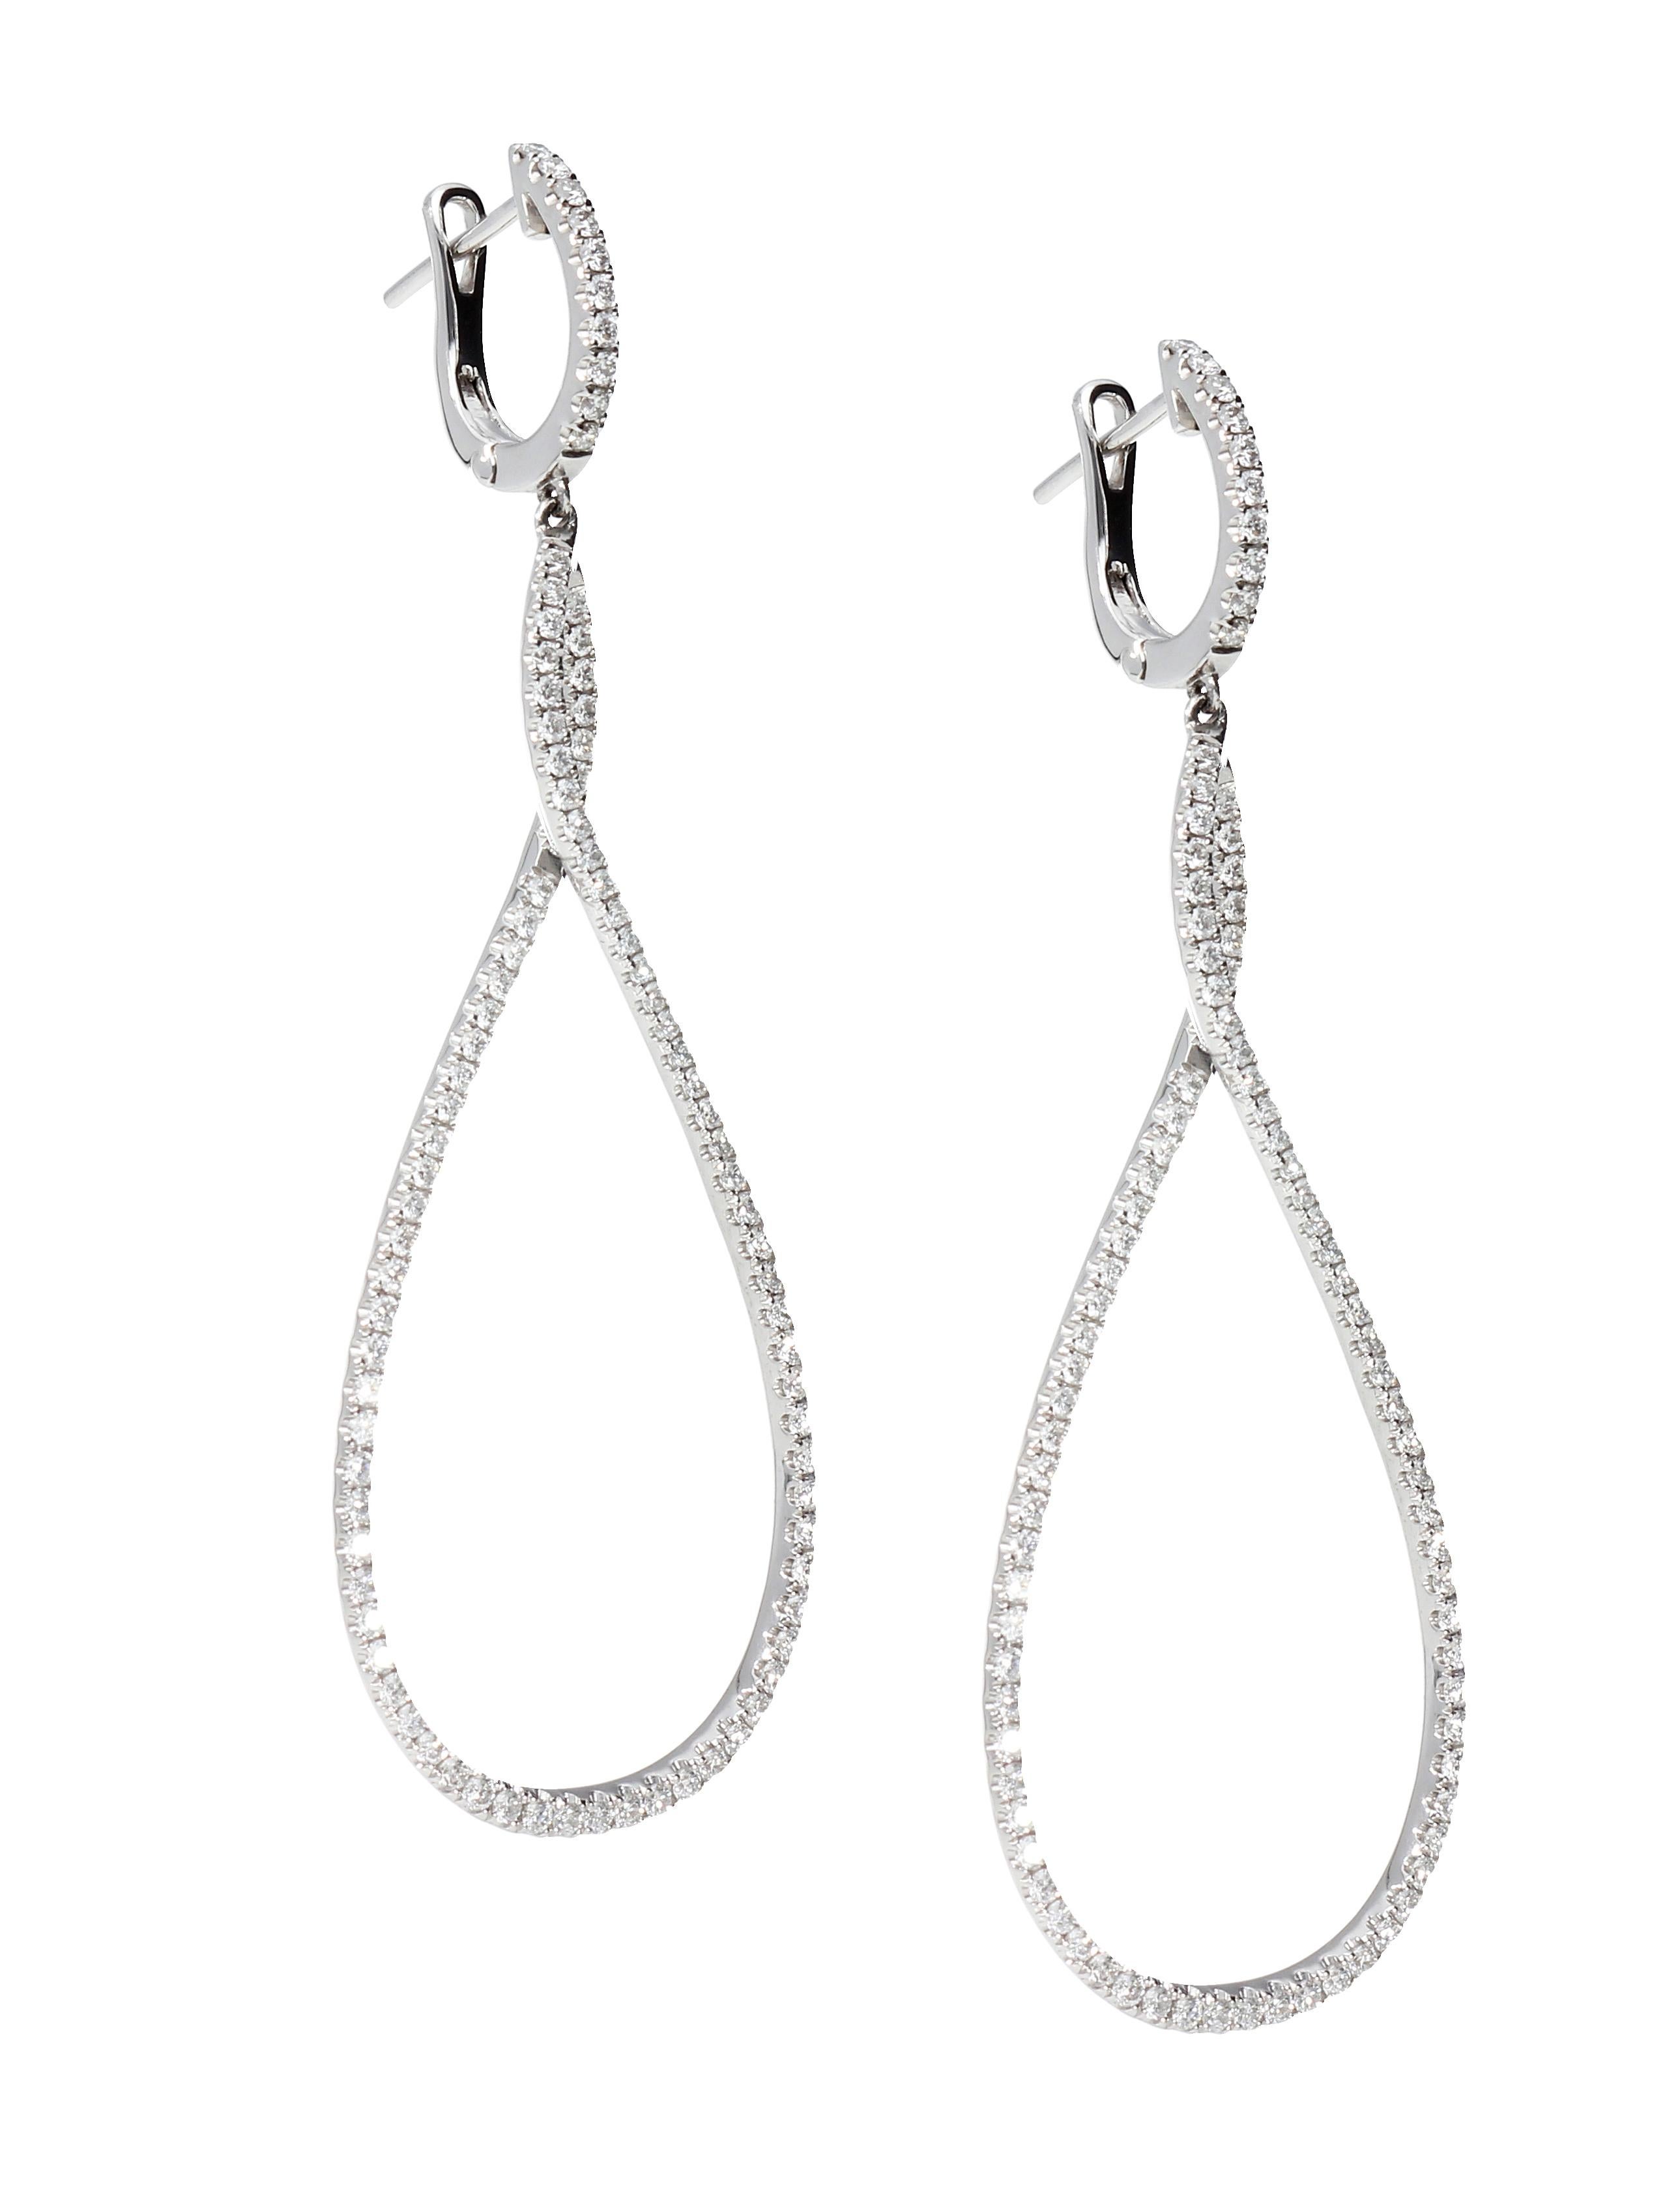 Helical-Shaped Earrings with 1.40 ct of Diamonds. Gold 18 kt White  For Sale 2